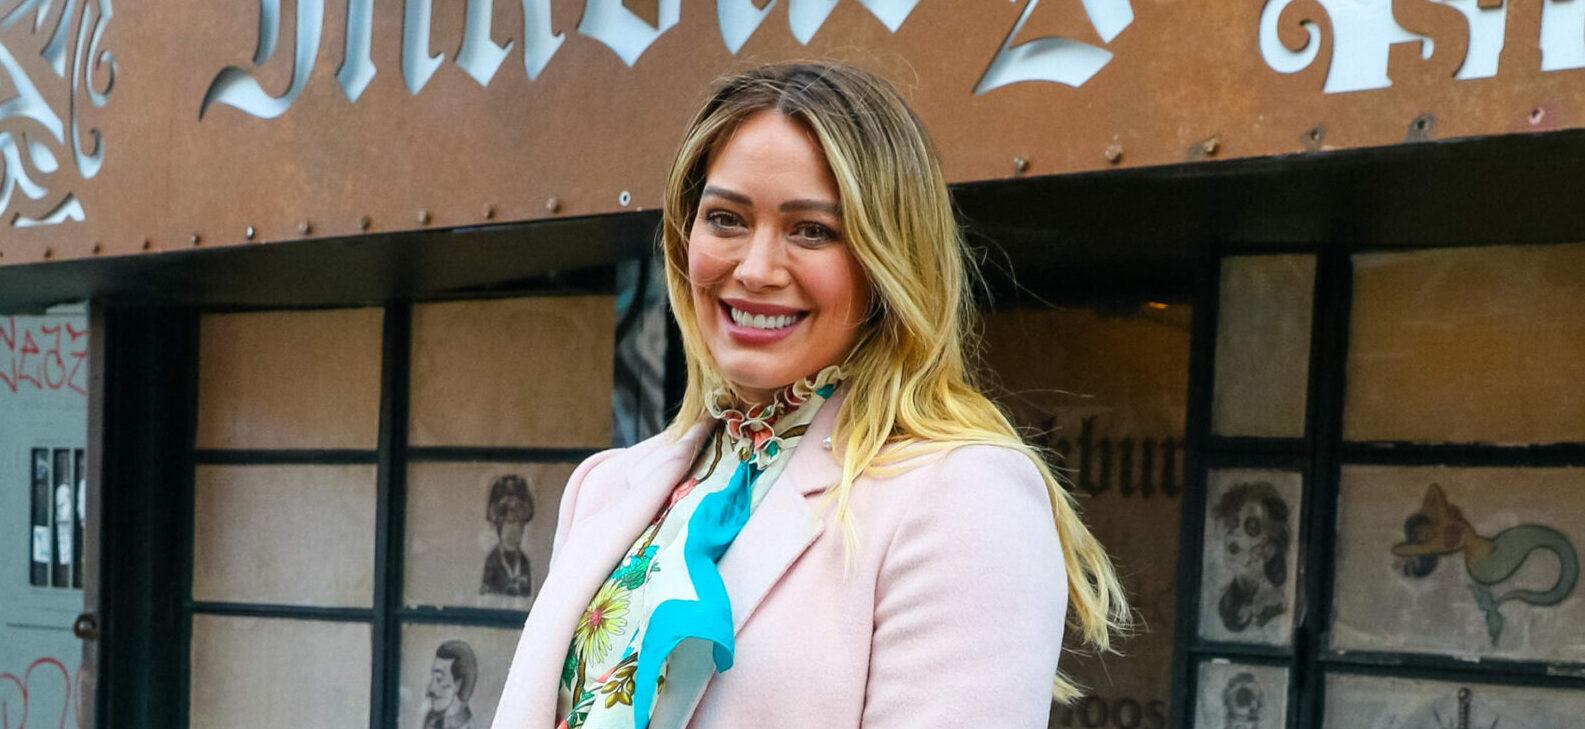 Hilary Duff at film set of apos Younger apos TV Series